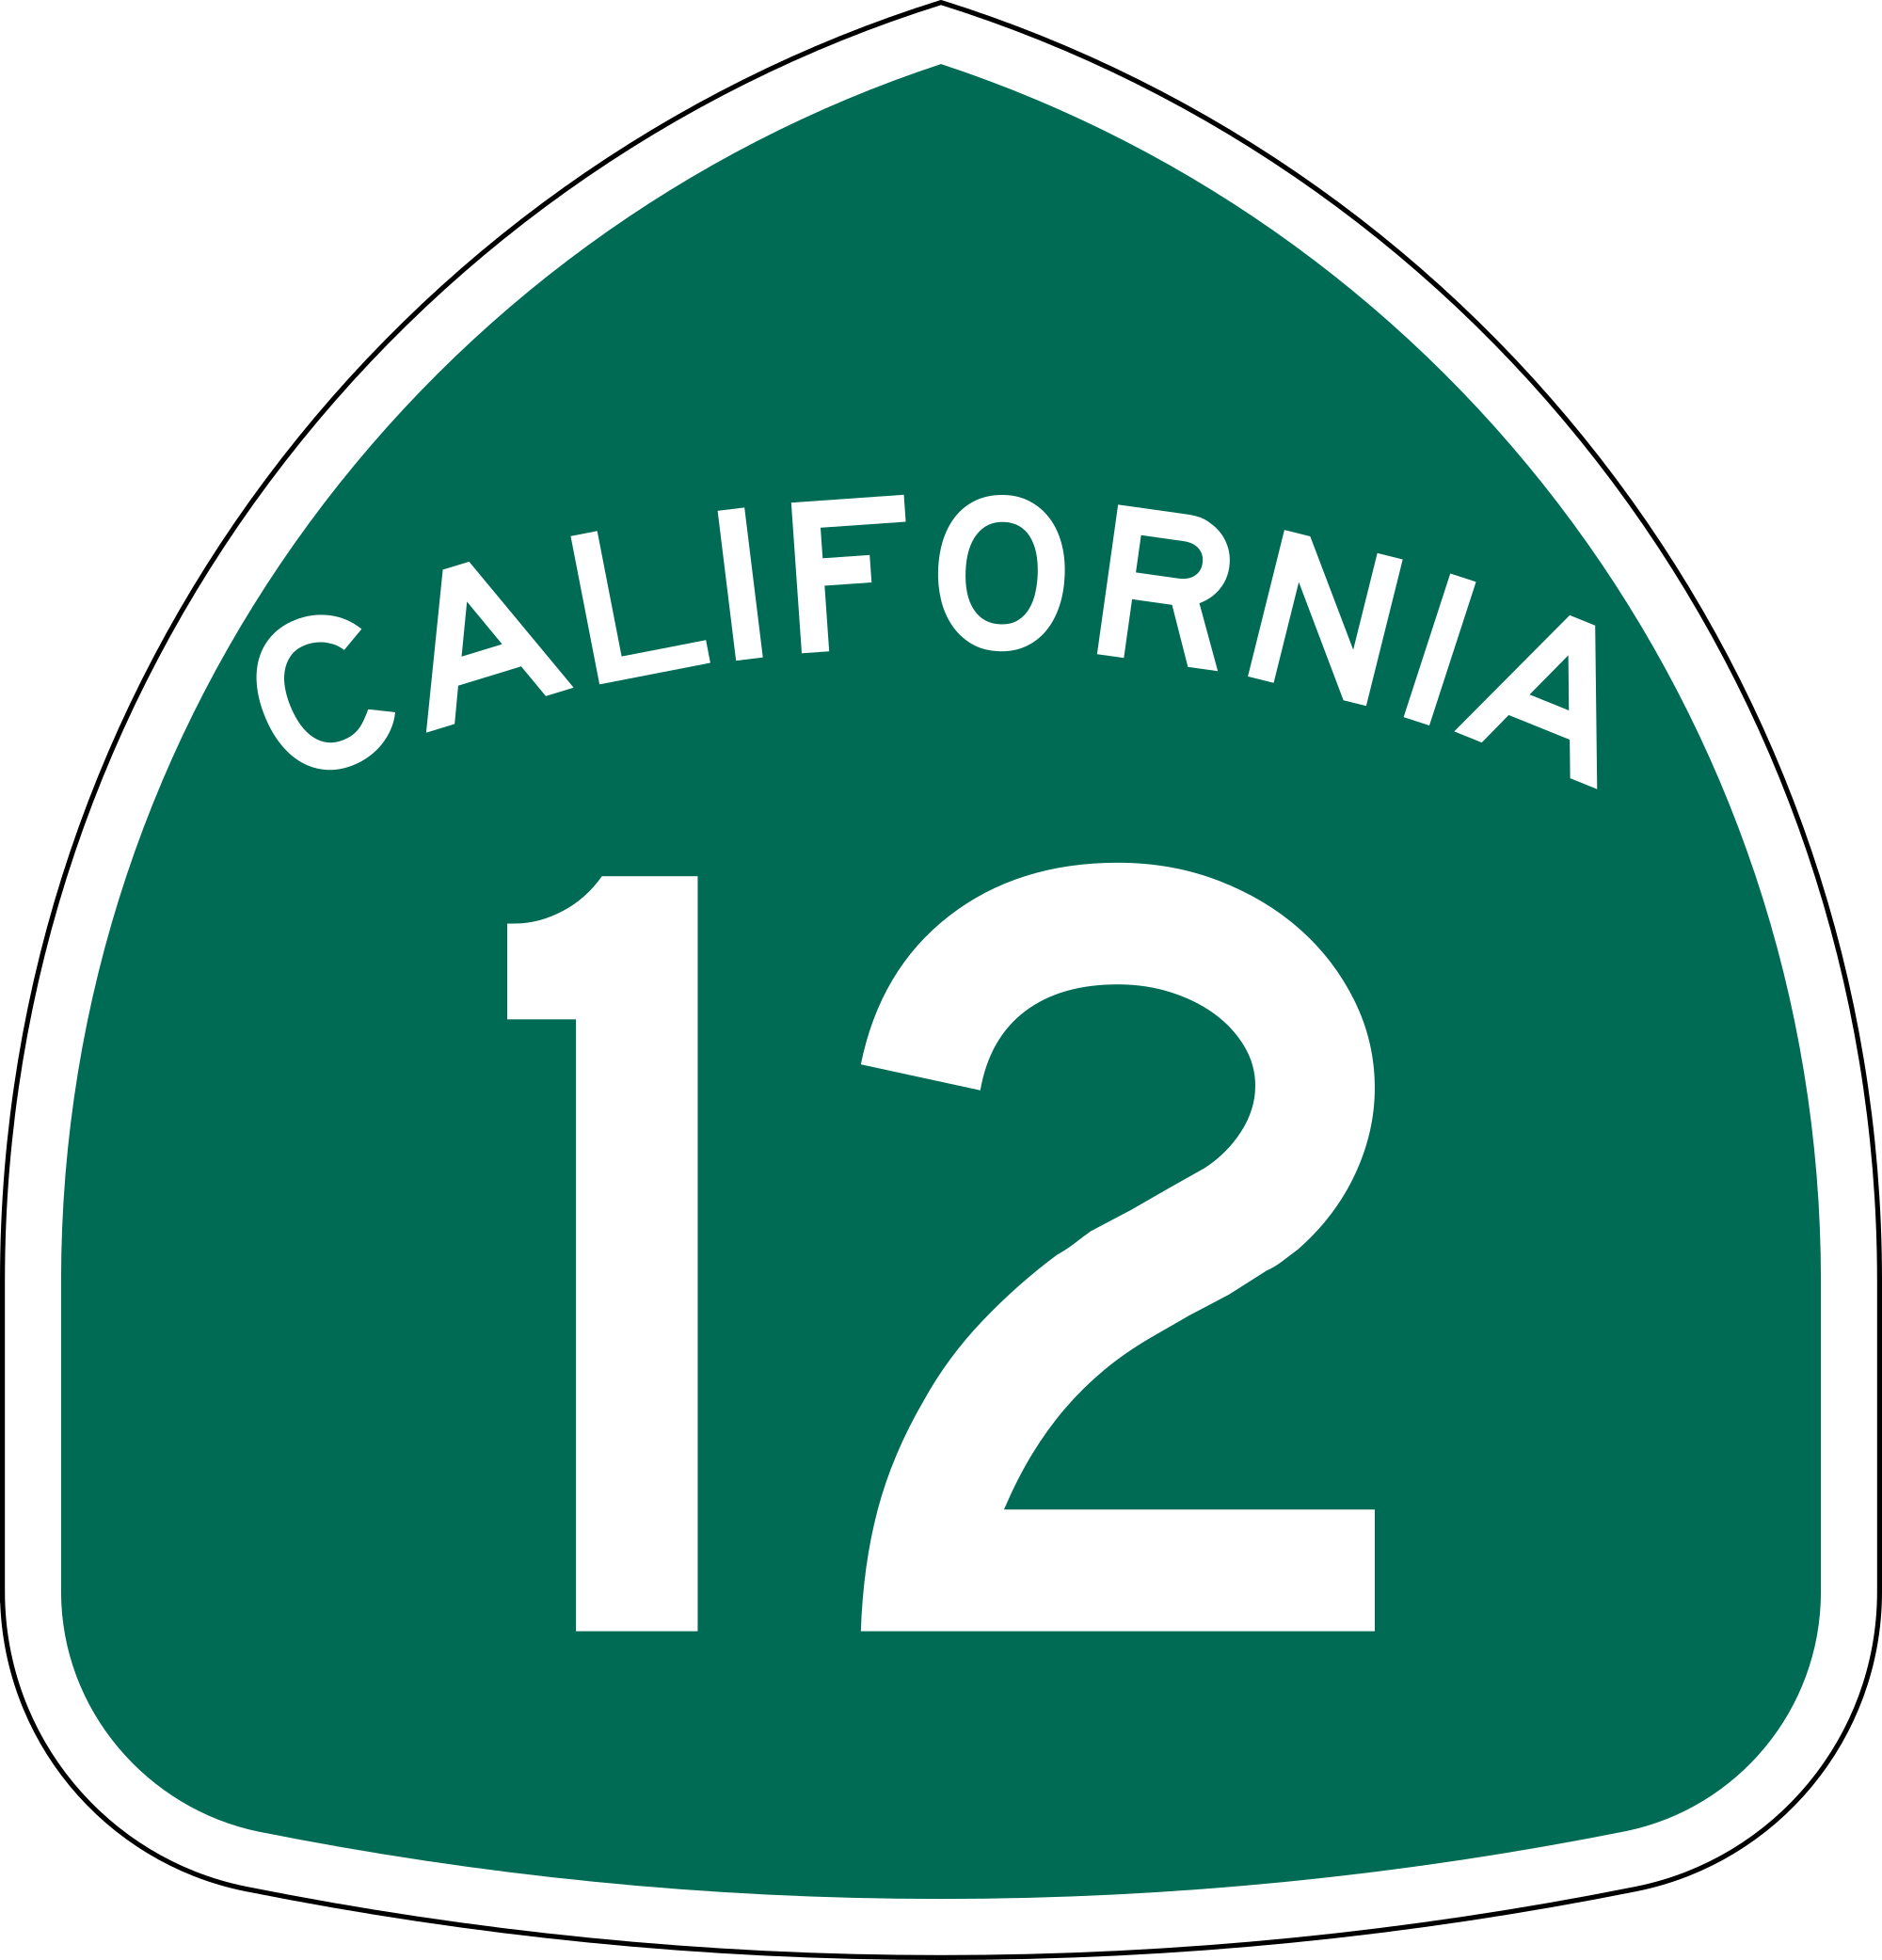 california clipart route sign